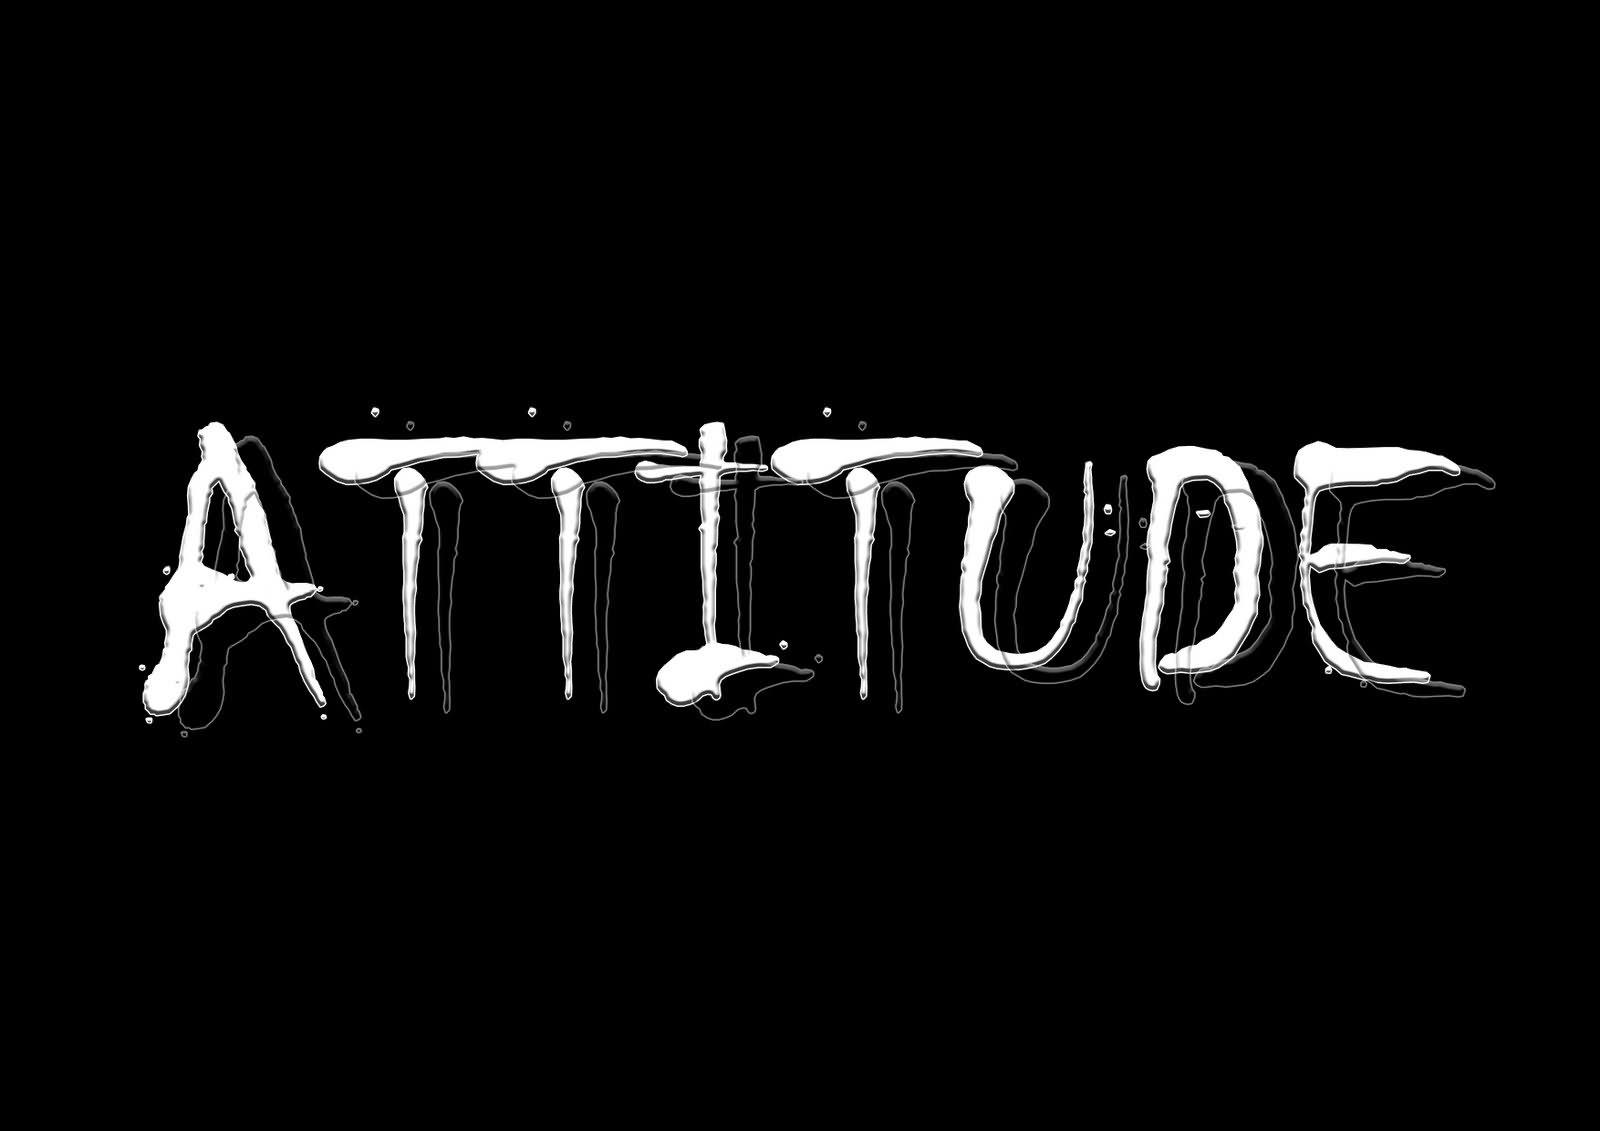 Attitude Pic Wallpapers - Wallpaper Cave